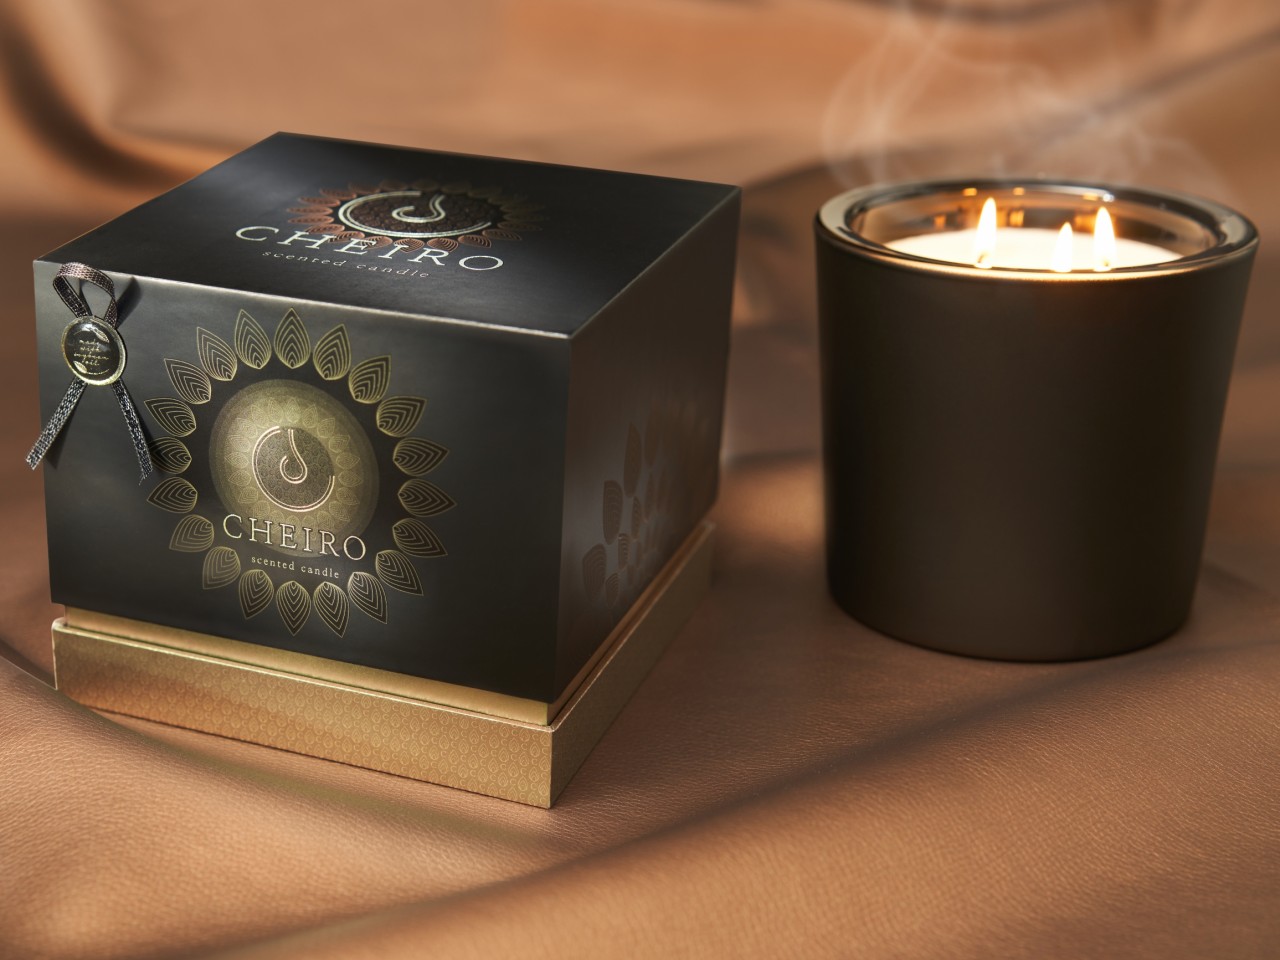 Natural Candles - Desirable and sustainable packaging design innovation for equally special candles.